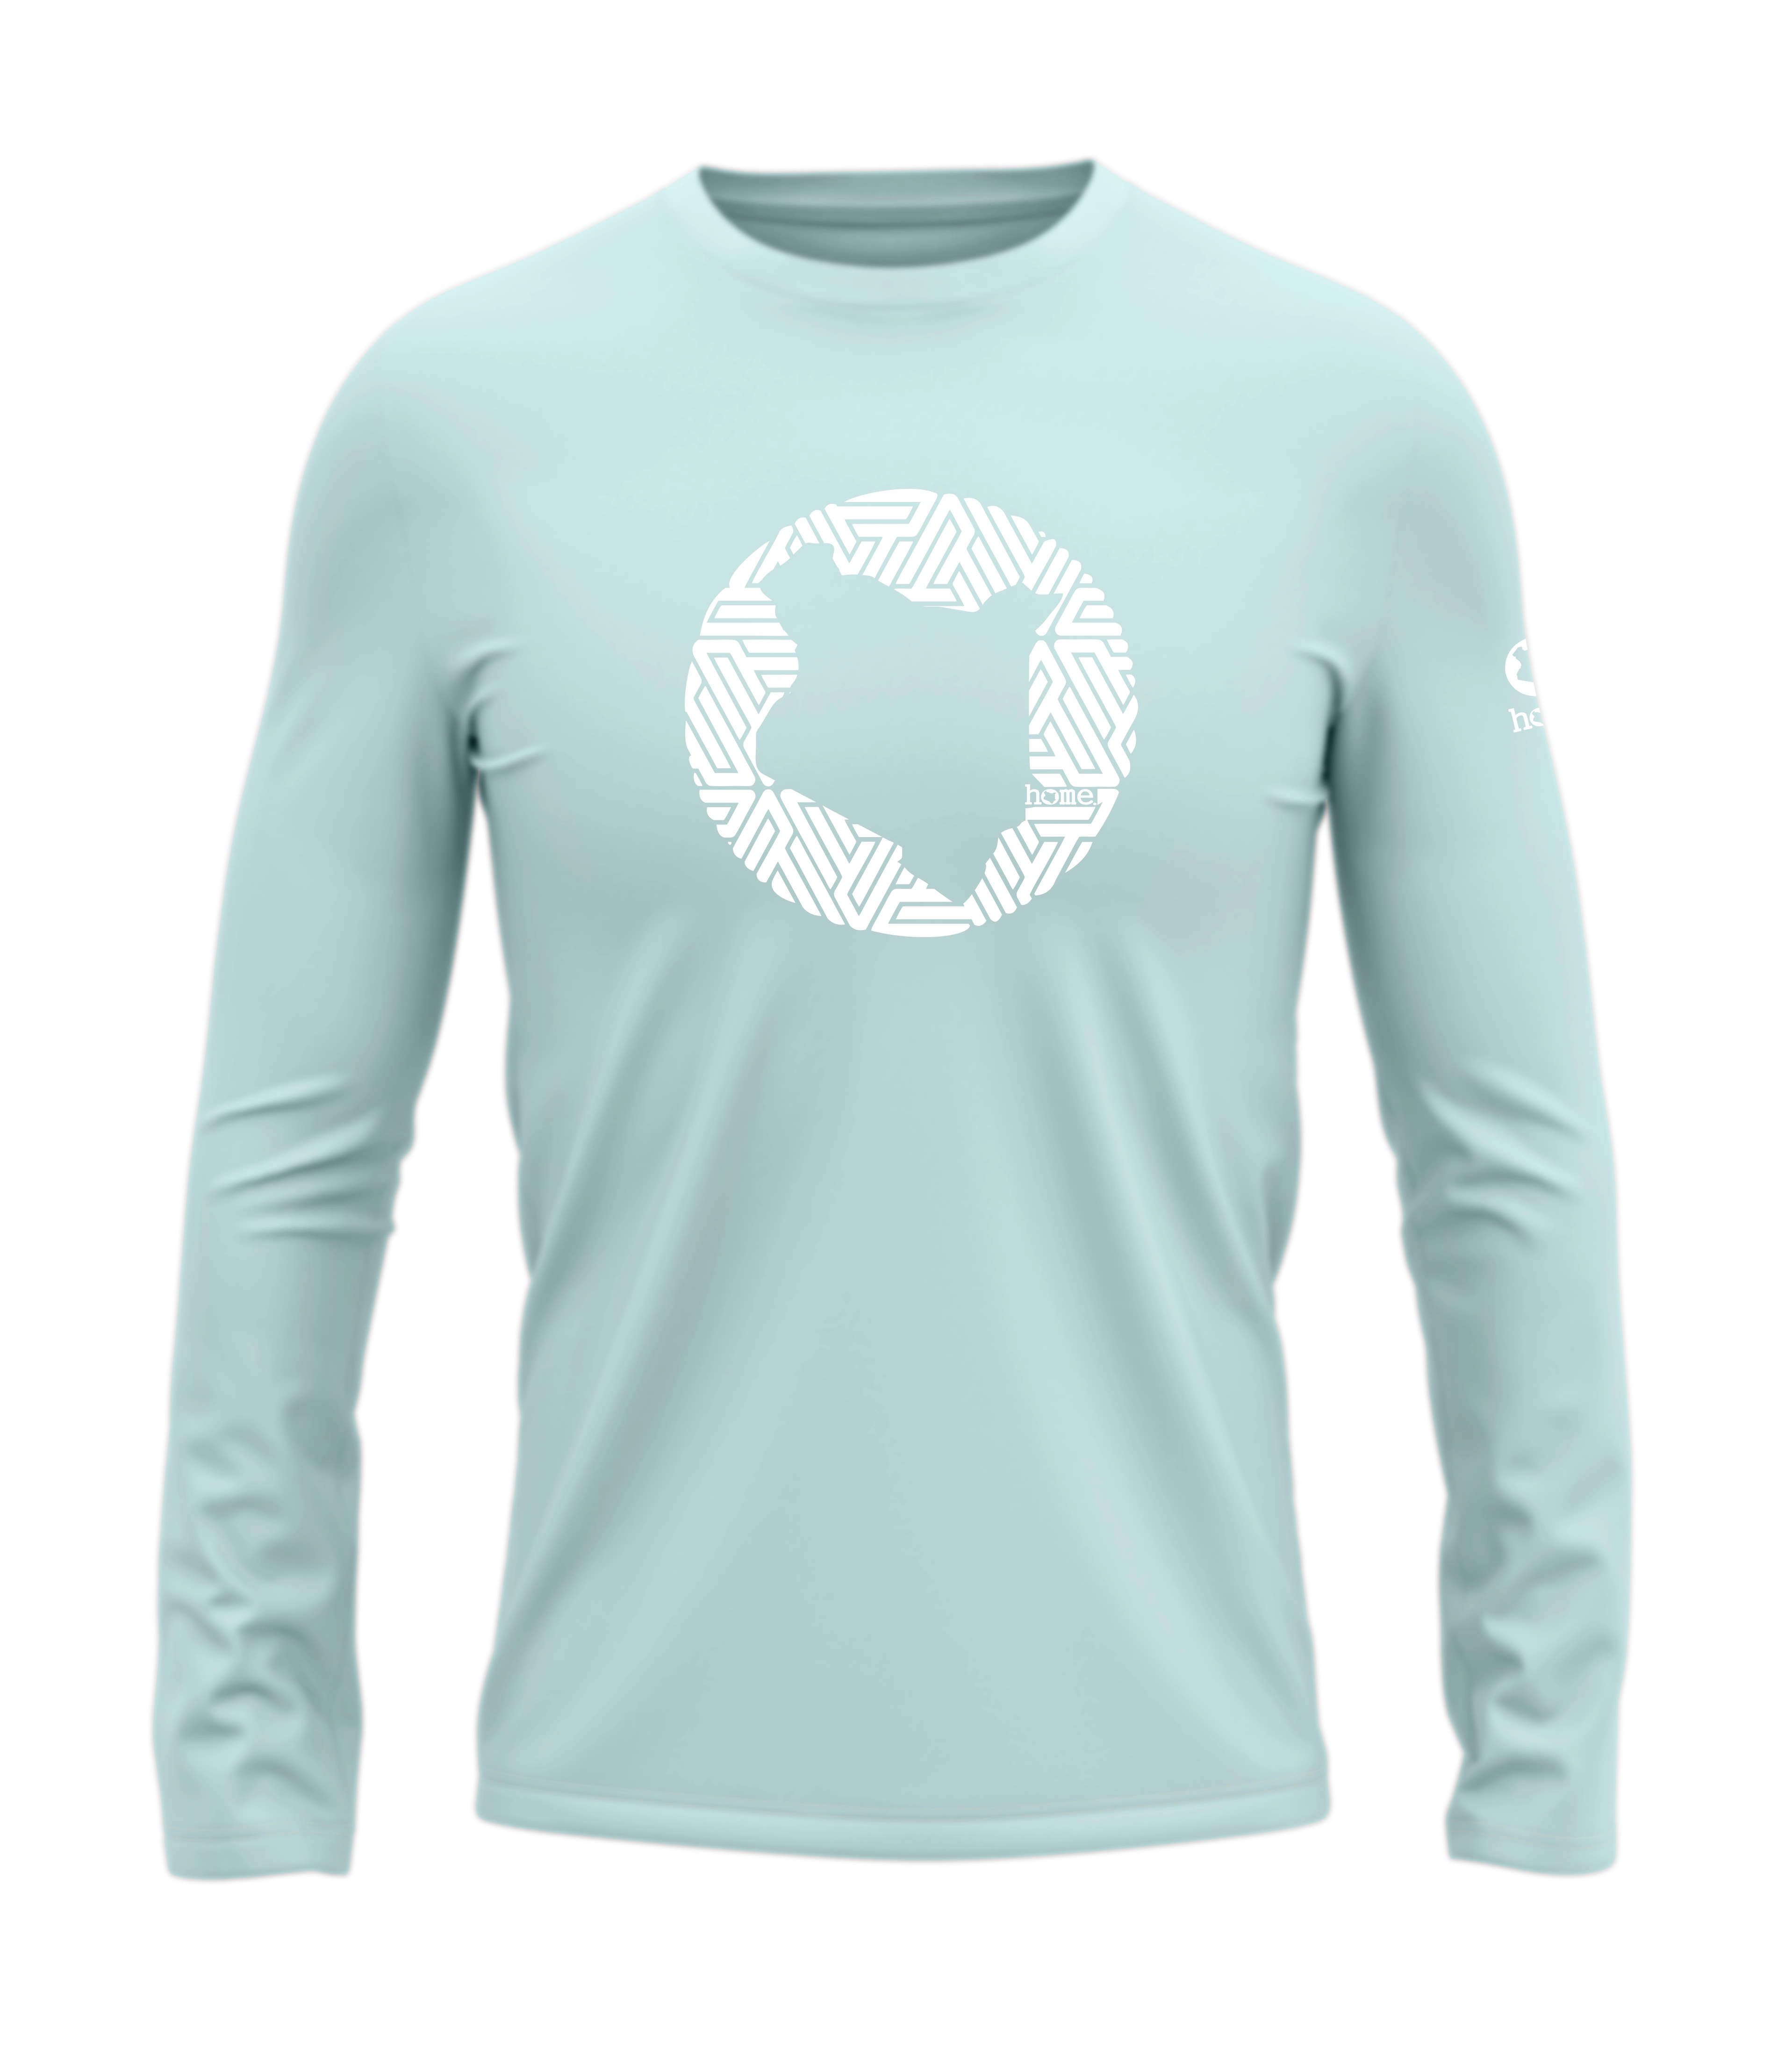 home_254 LONG-SLEEVED MISTY BLUE T-SHIRT WITH A WHITE MAP PRINT – COTTON PLUS FABRIC